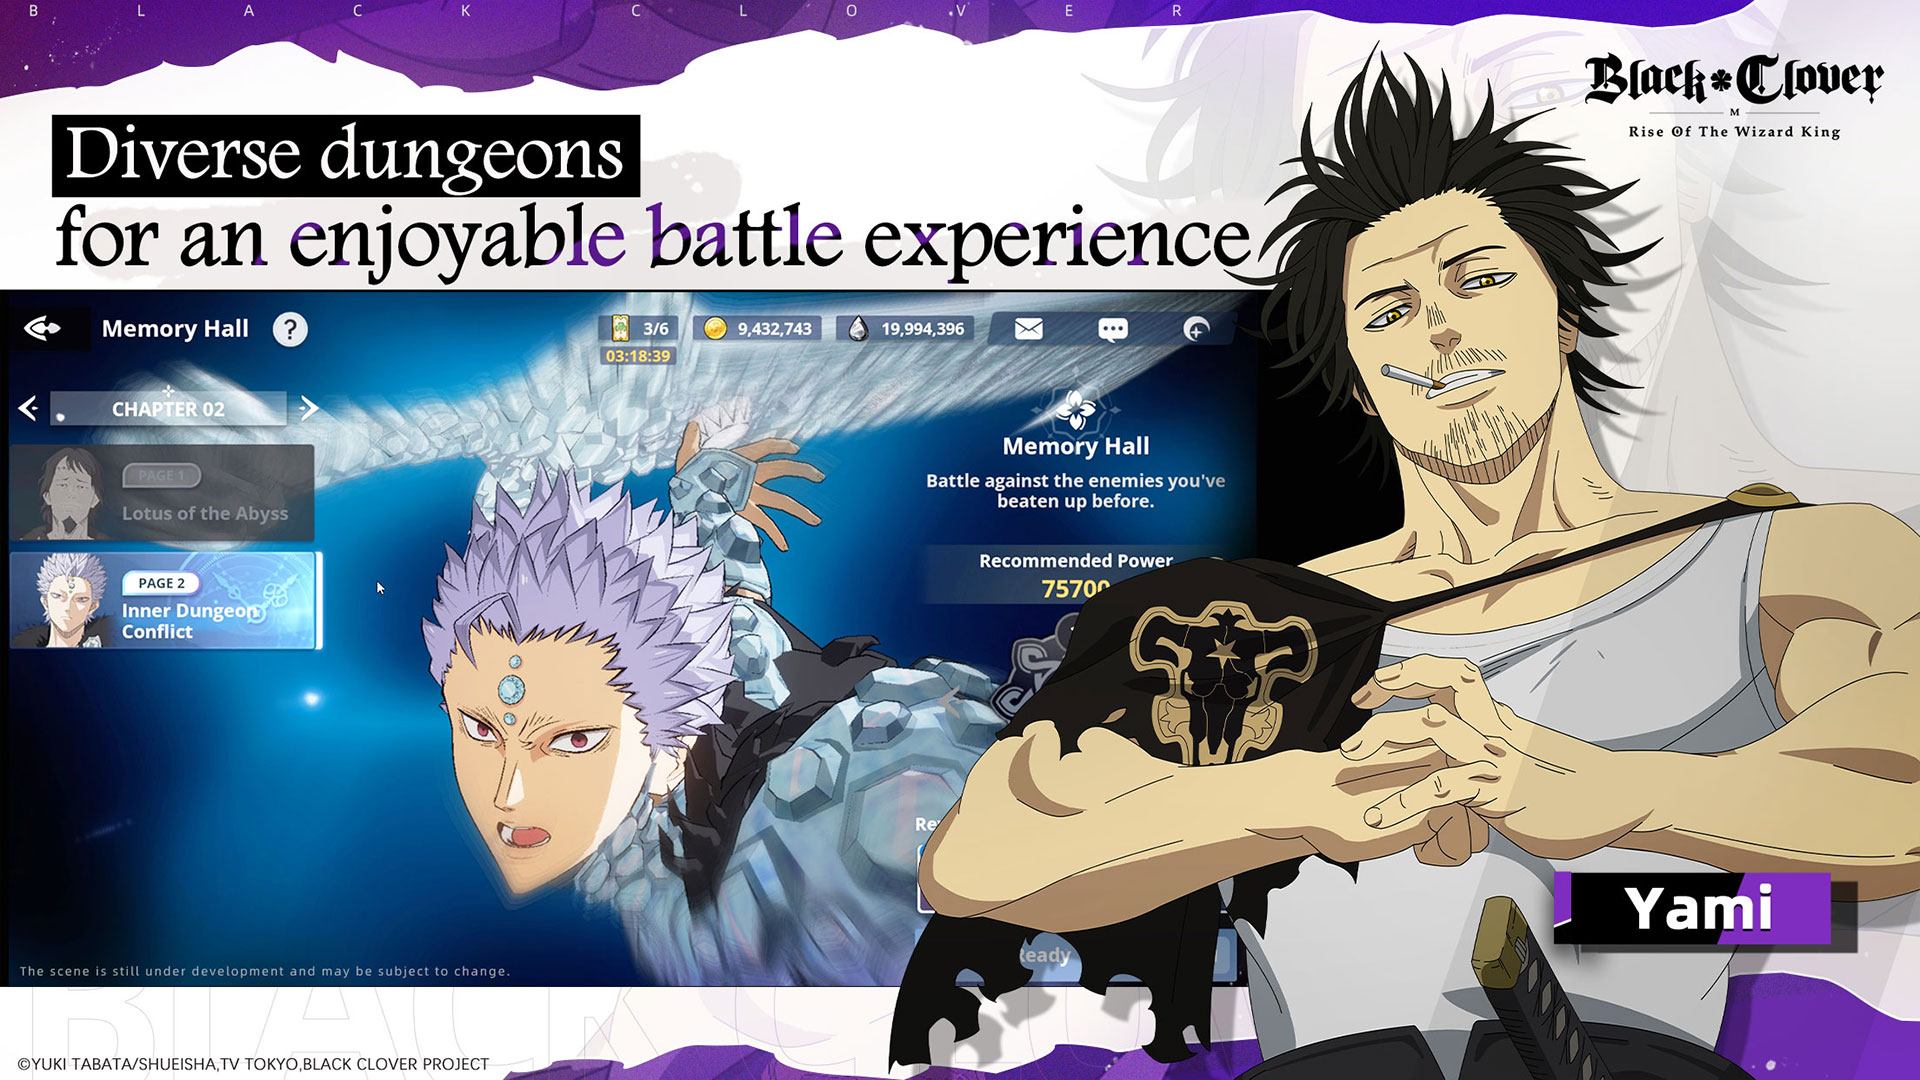 Black Clover M: Rise of the Wizard King - Unleash Magic on Bluestacks for the Ultimate Gaming Experience!